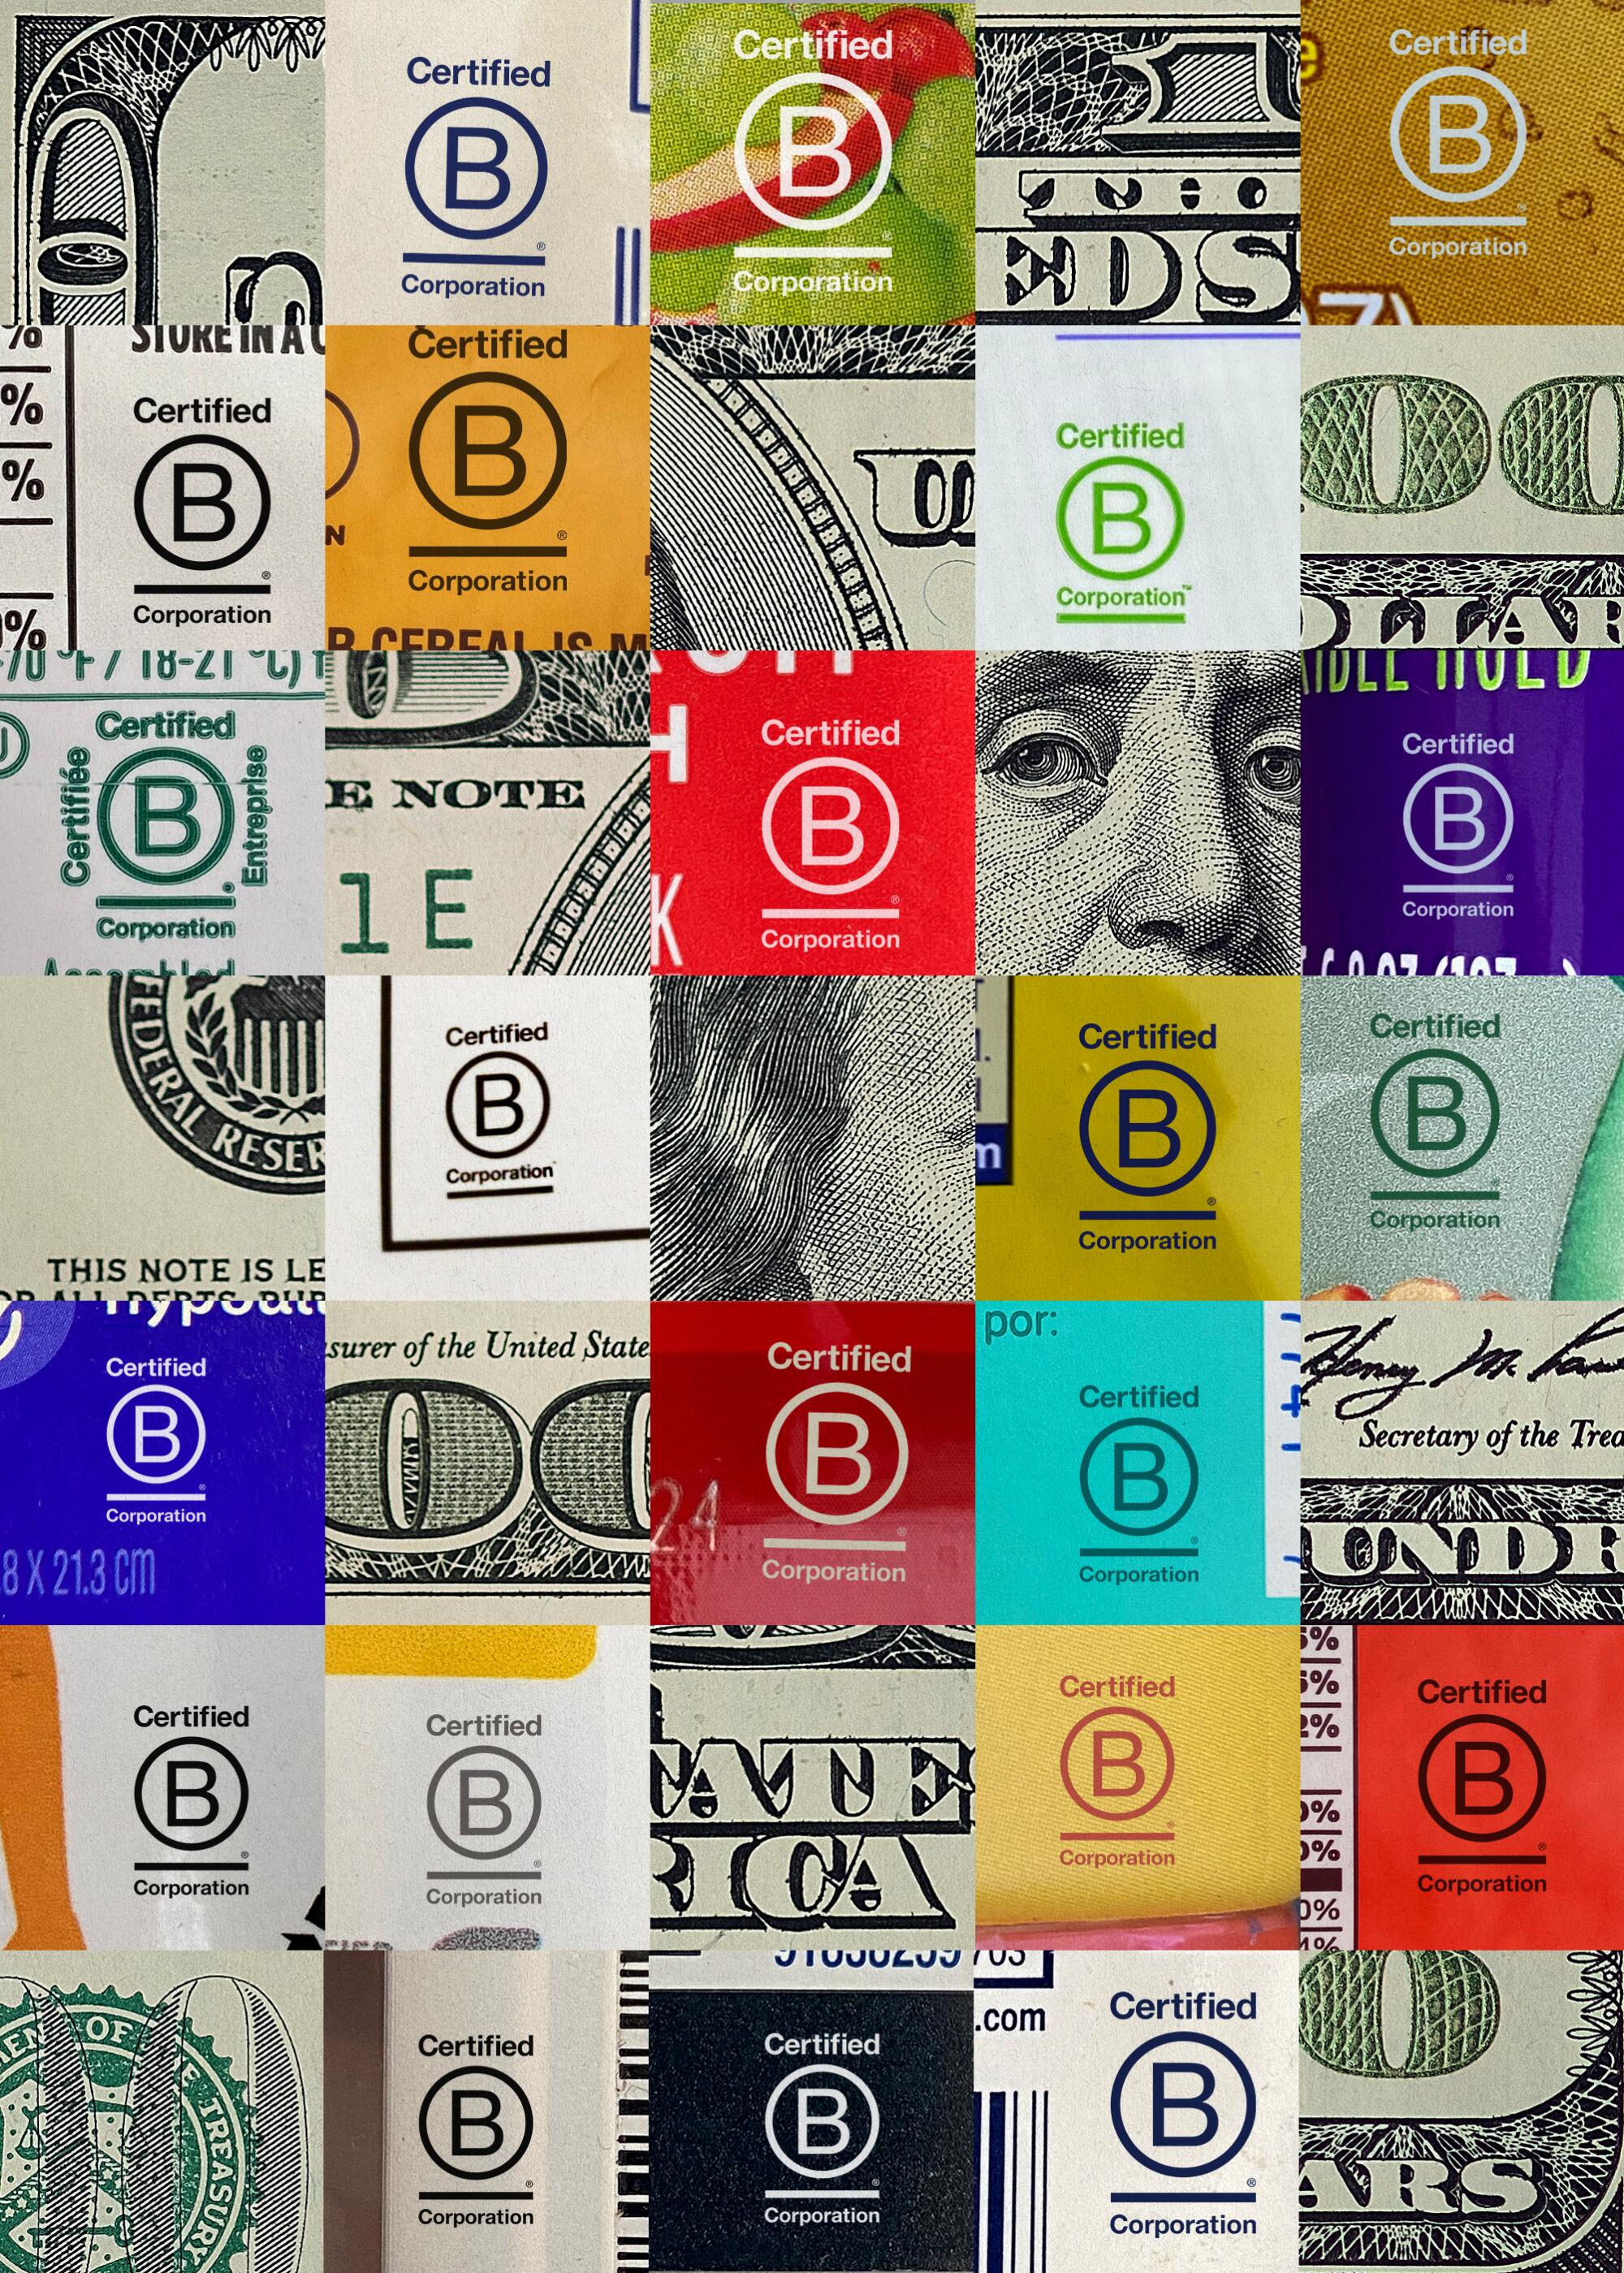 Photo illustration of B Corp logos on labels and money arranged in a grid